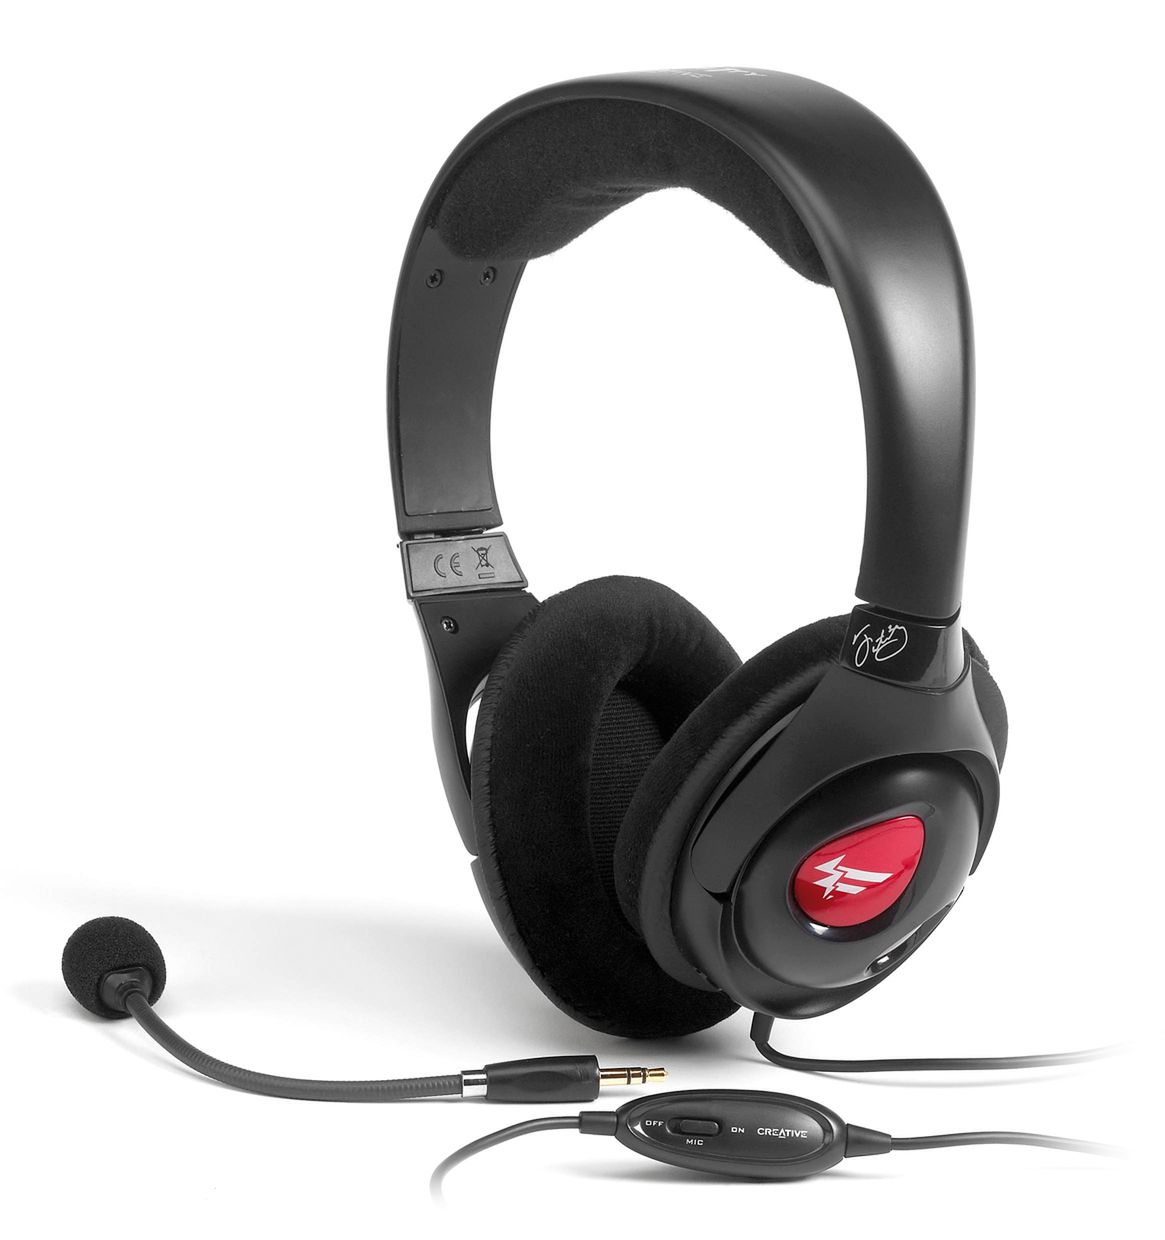 Creative Headset HS-800 Fatal1ty Gaming